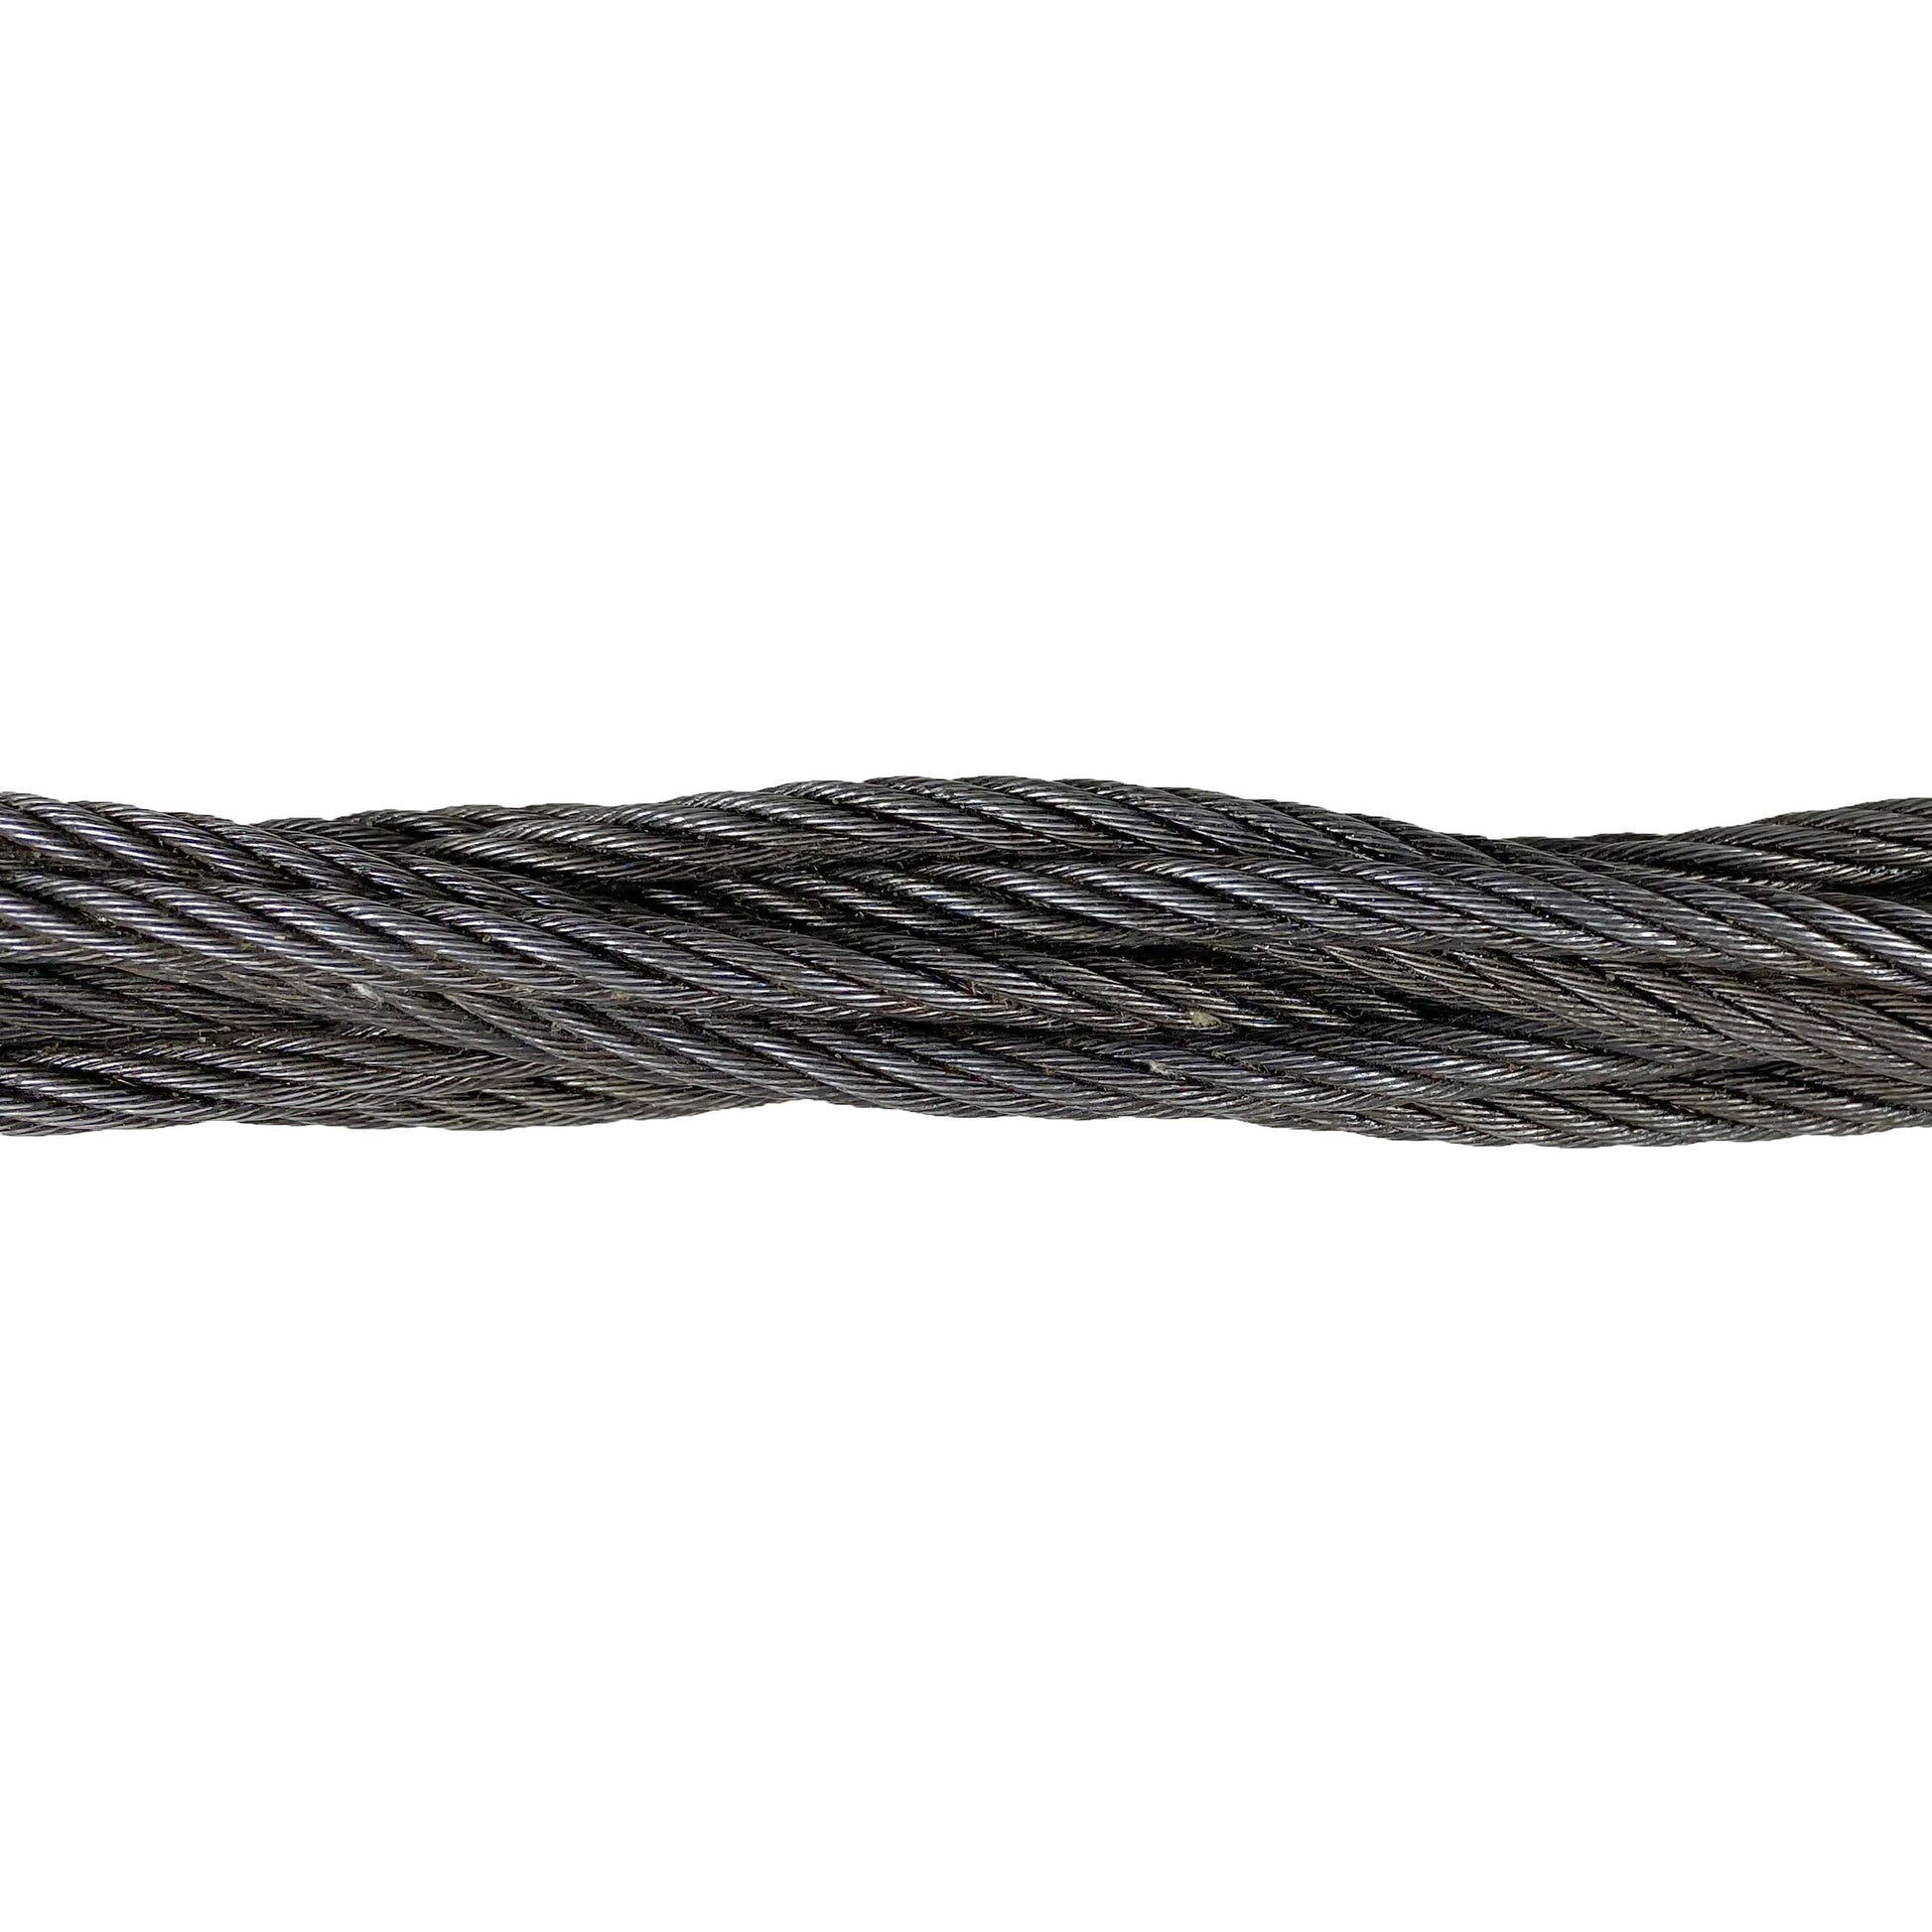 112 inch x 18 foot Nine Part Braided Wire Rope Sling image 3 of 3